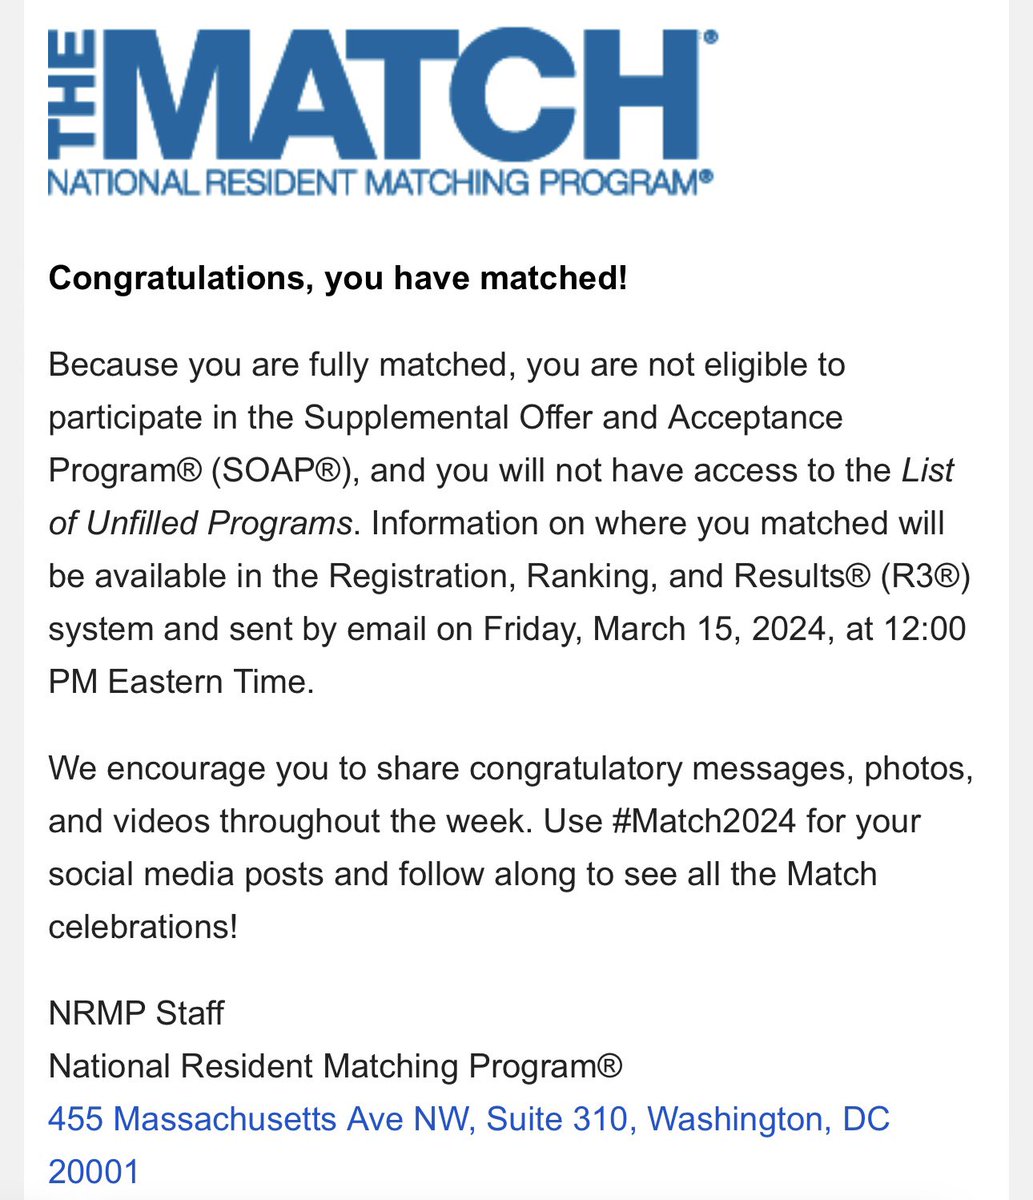 I MATCHED!! I’m joining the best specialty there is, Med-Peds! So excited to finally be a physician. #match2024 #medpeds